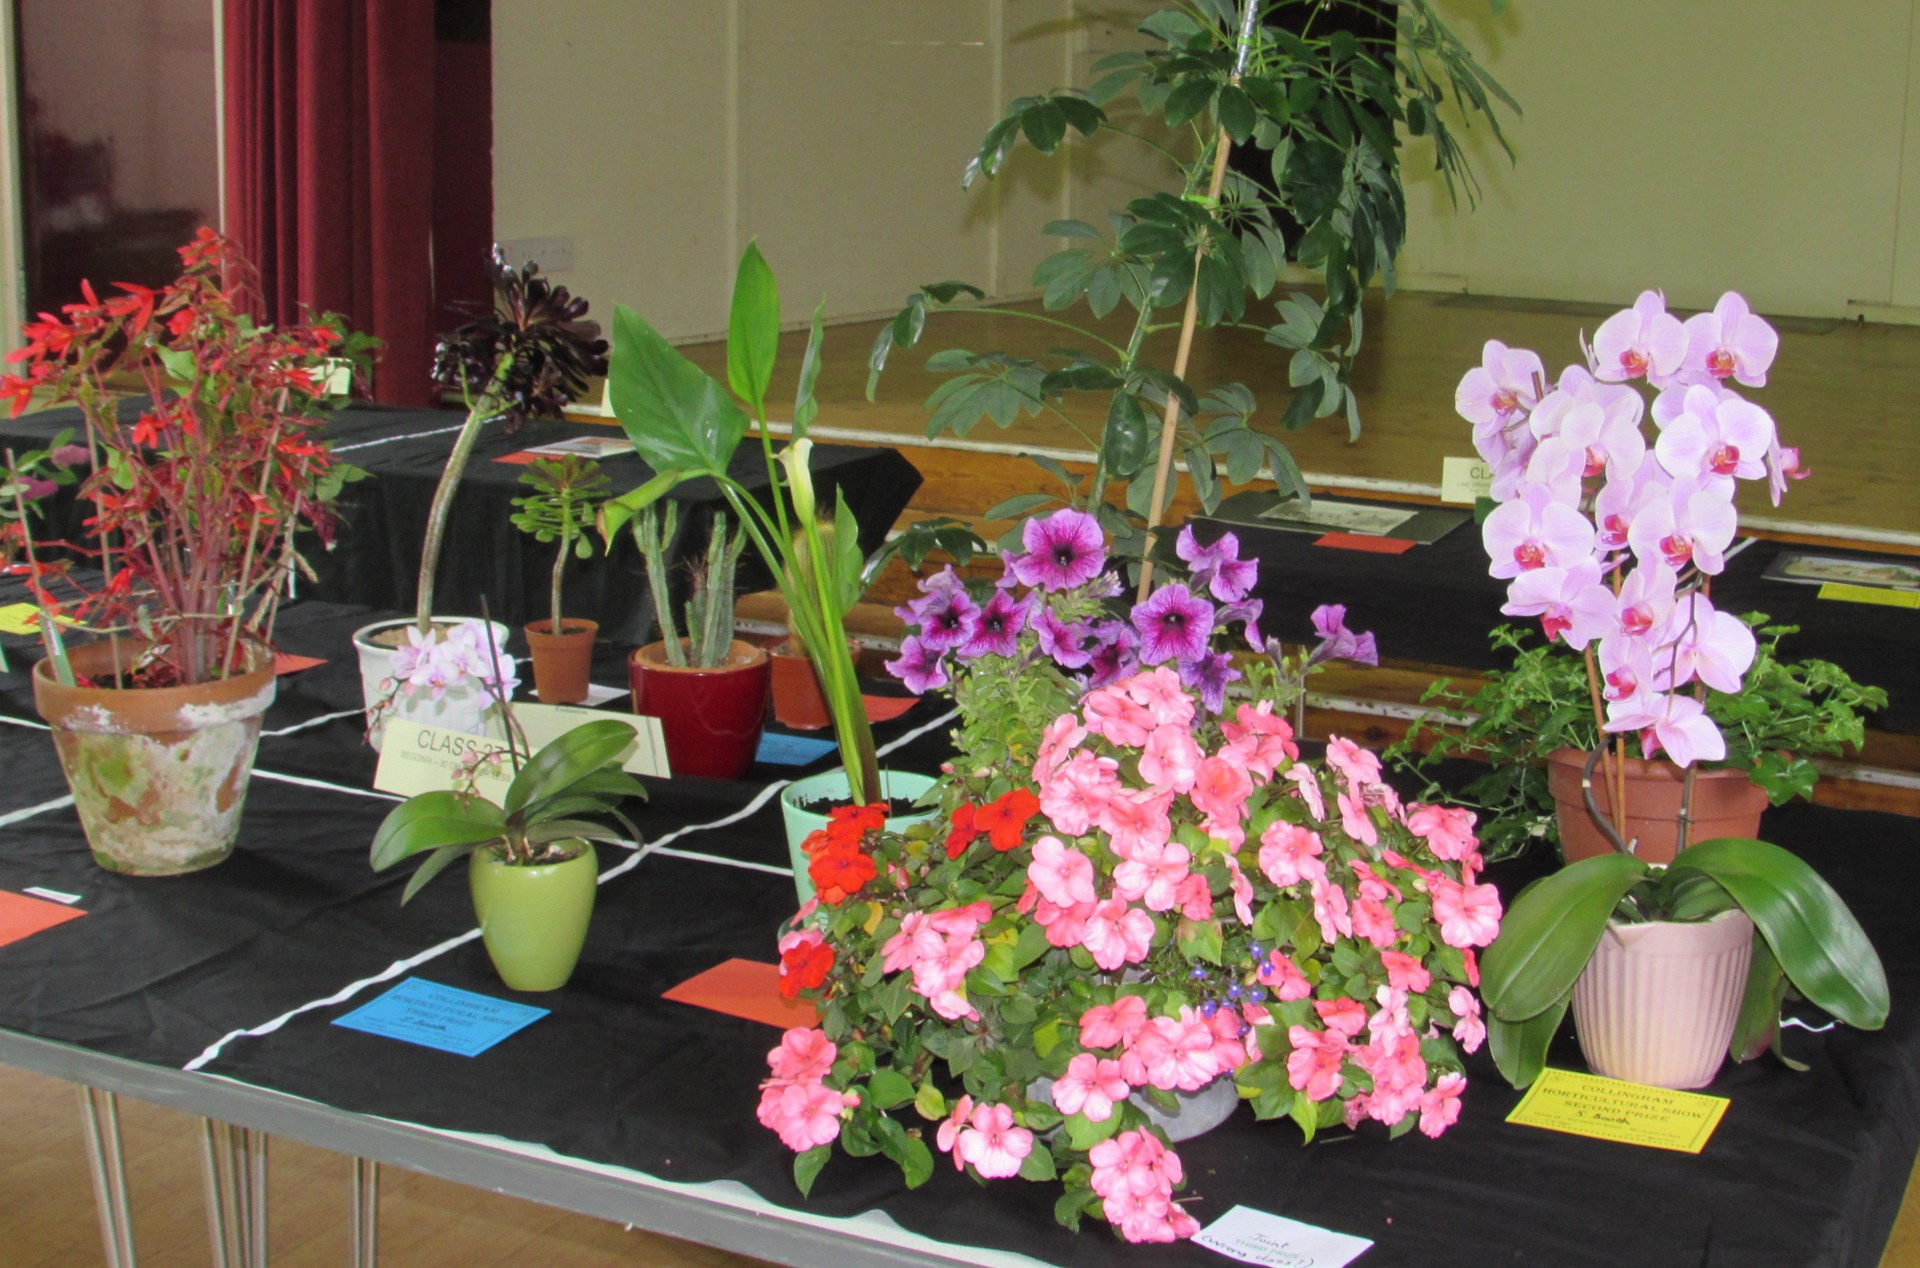 Collingham and District Gardening Association 2019 Horticultural Show